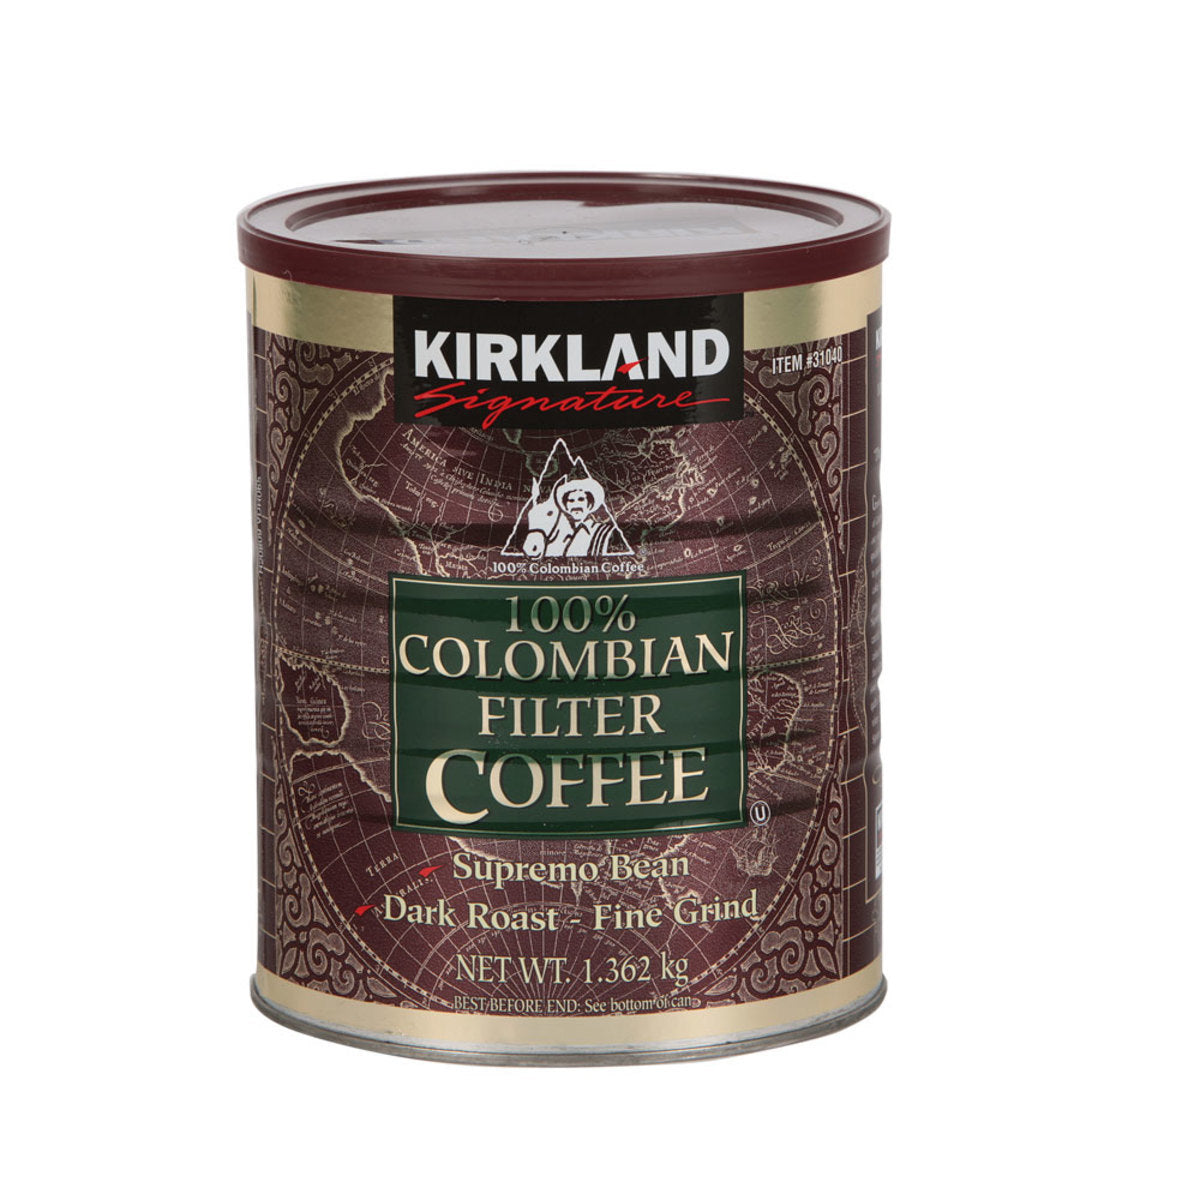 Kirkland Signature 100% Colombian Ground Filter Coffee, 1.362kg Coffee Beans Costco UK weight  